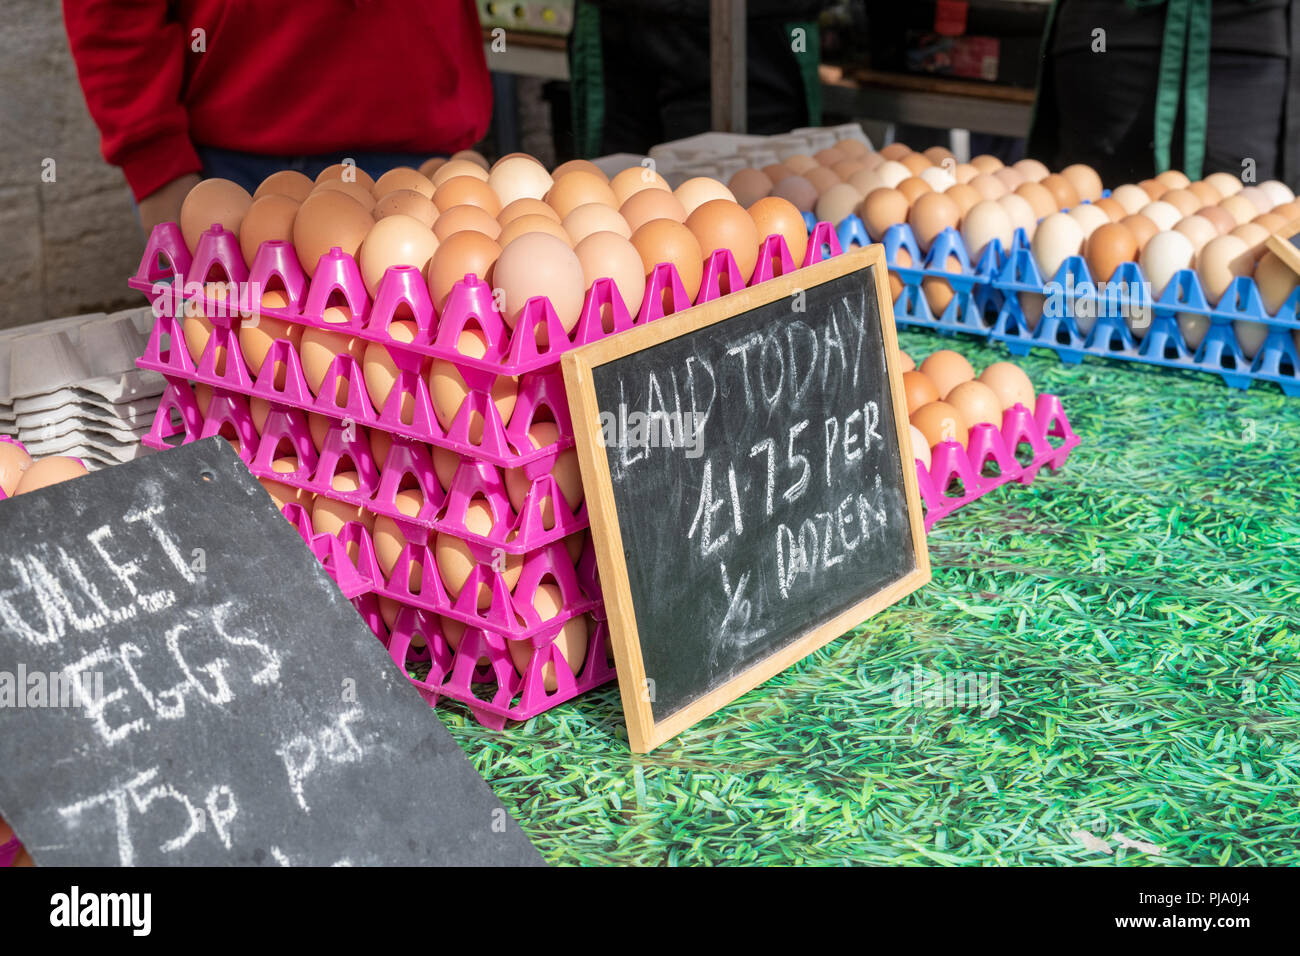 Fresh eggs for sale at Stroud farmers market. Stroud, Gloucestershire, England Stock Photo